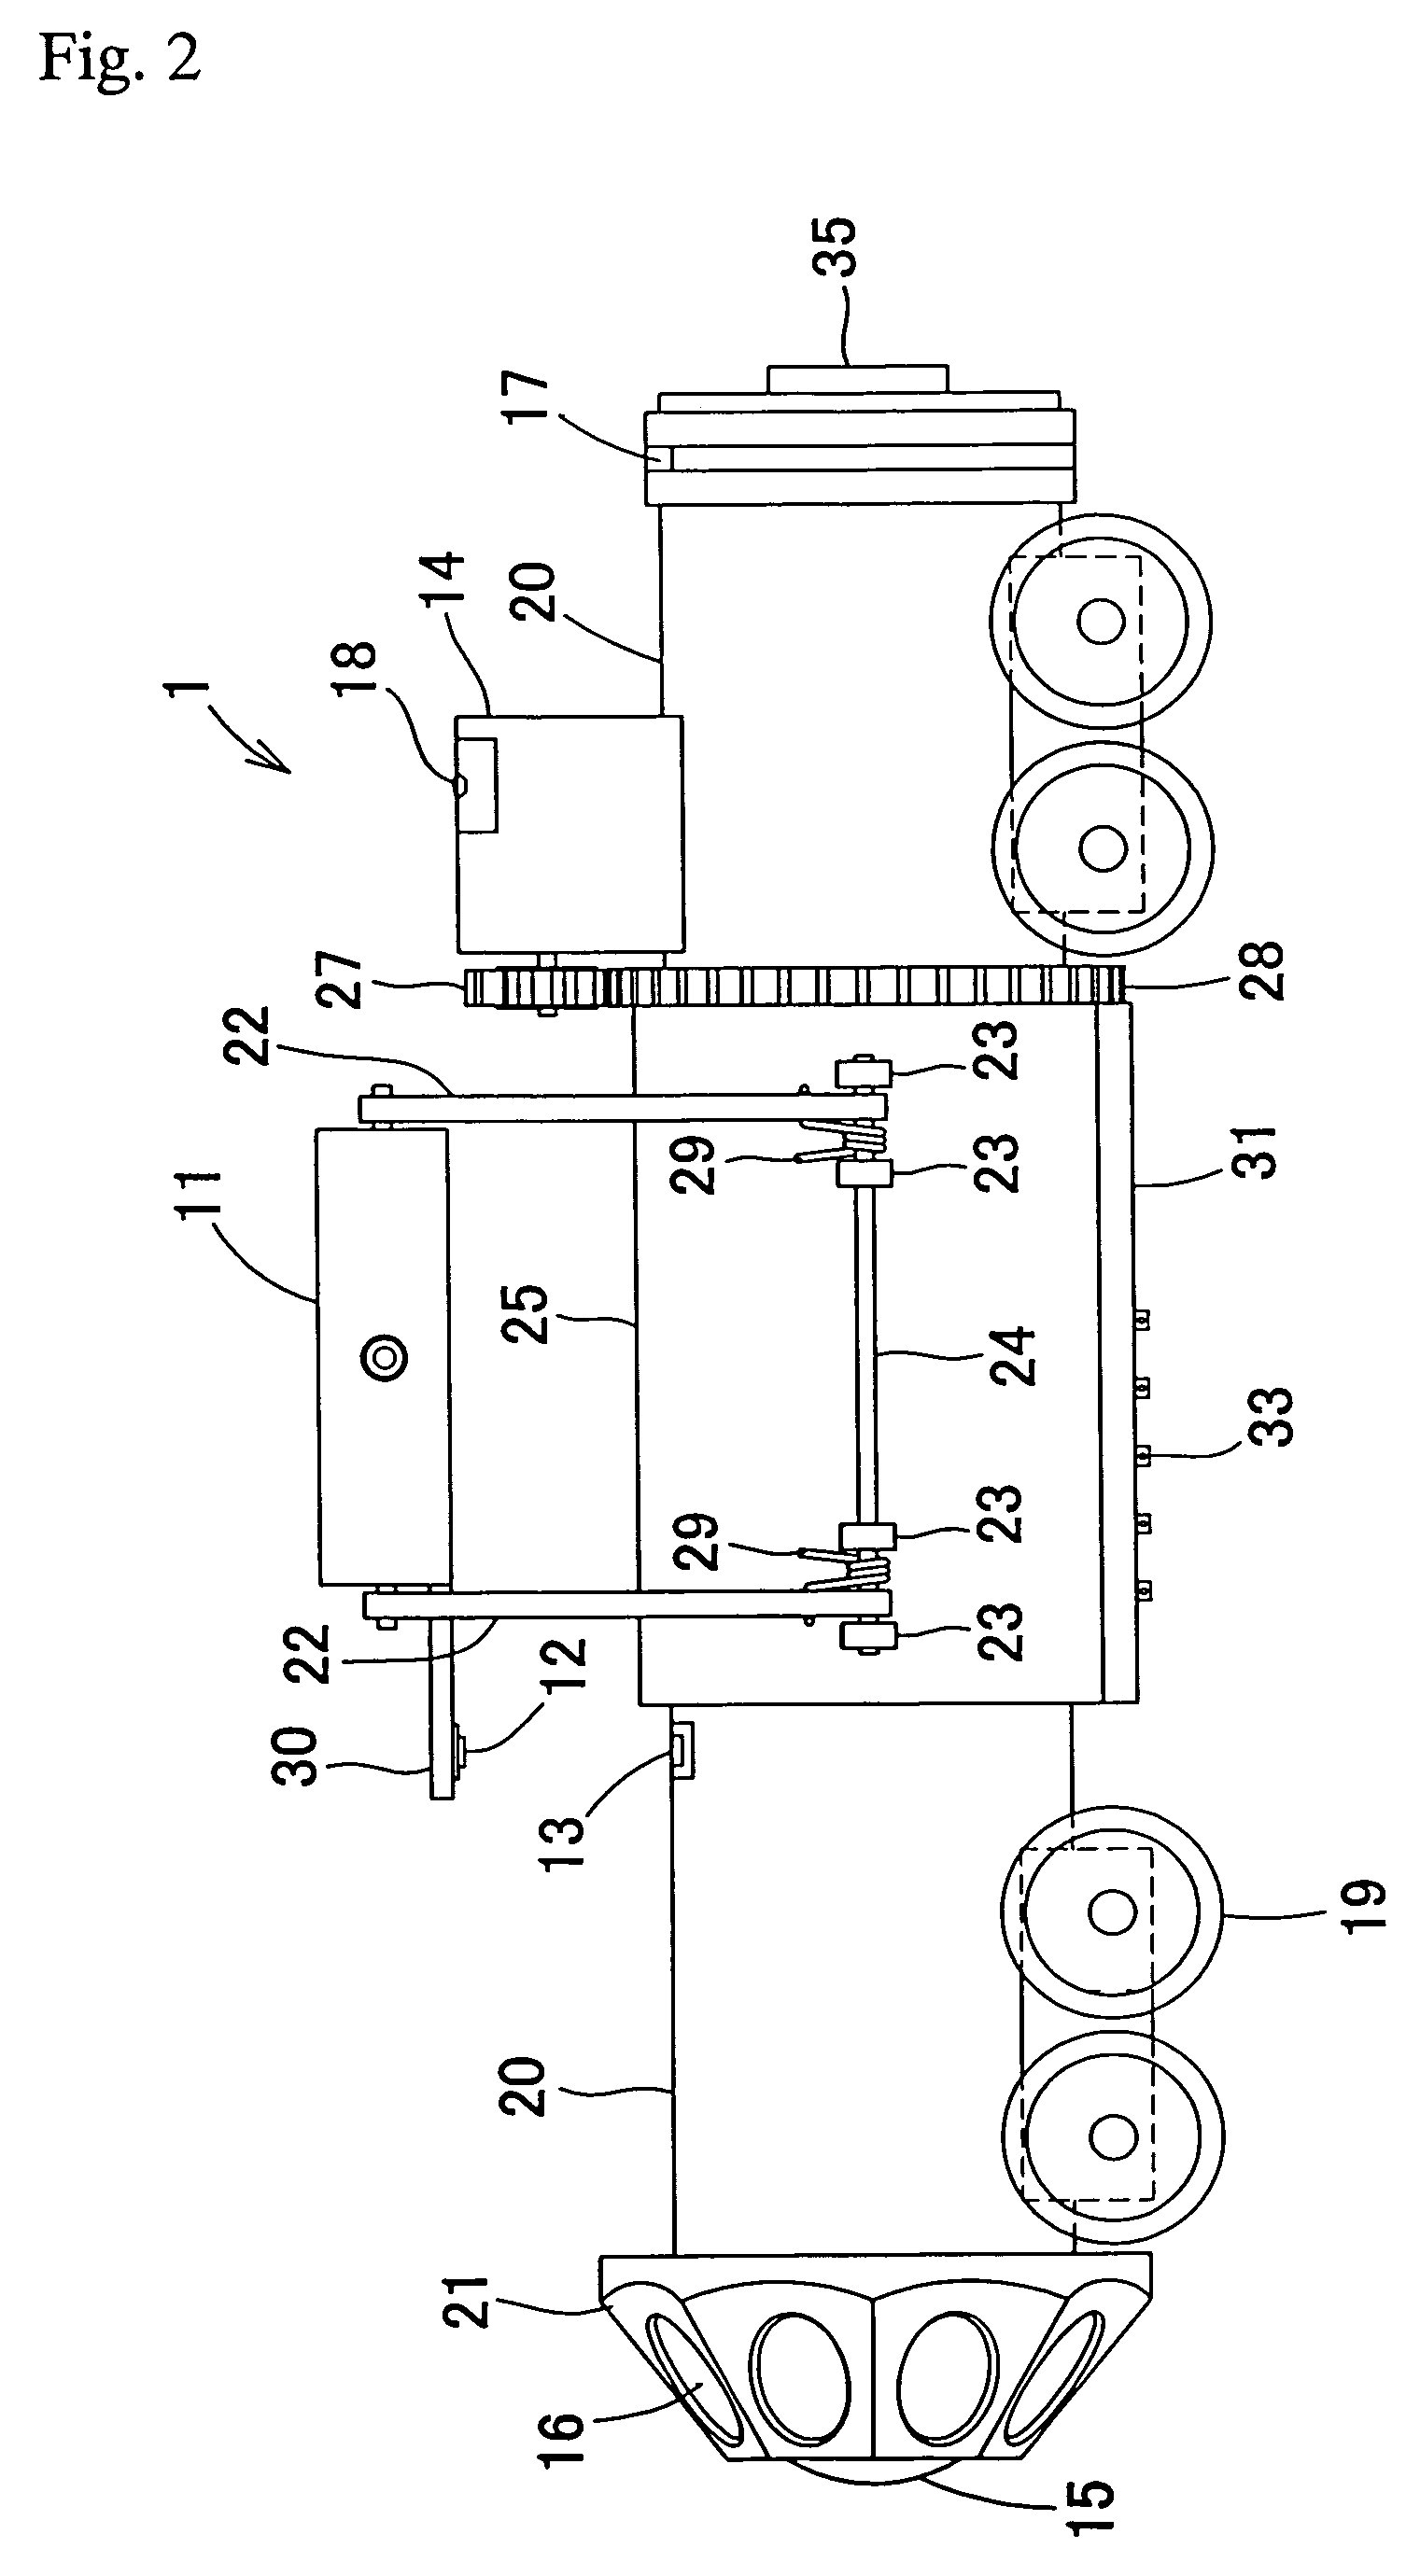 Device and method for inspecting inside of underground pipe line and method of inspecting concrete on inside of underground pipe line for deterioration